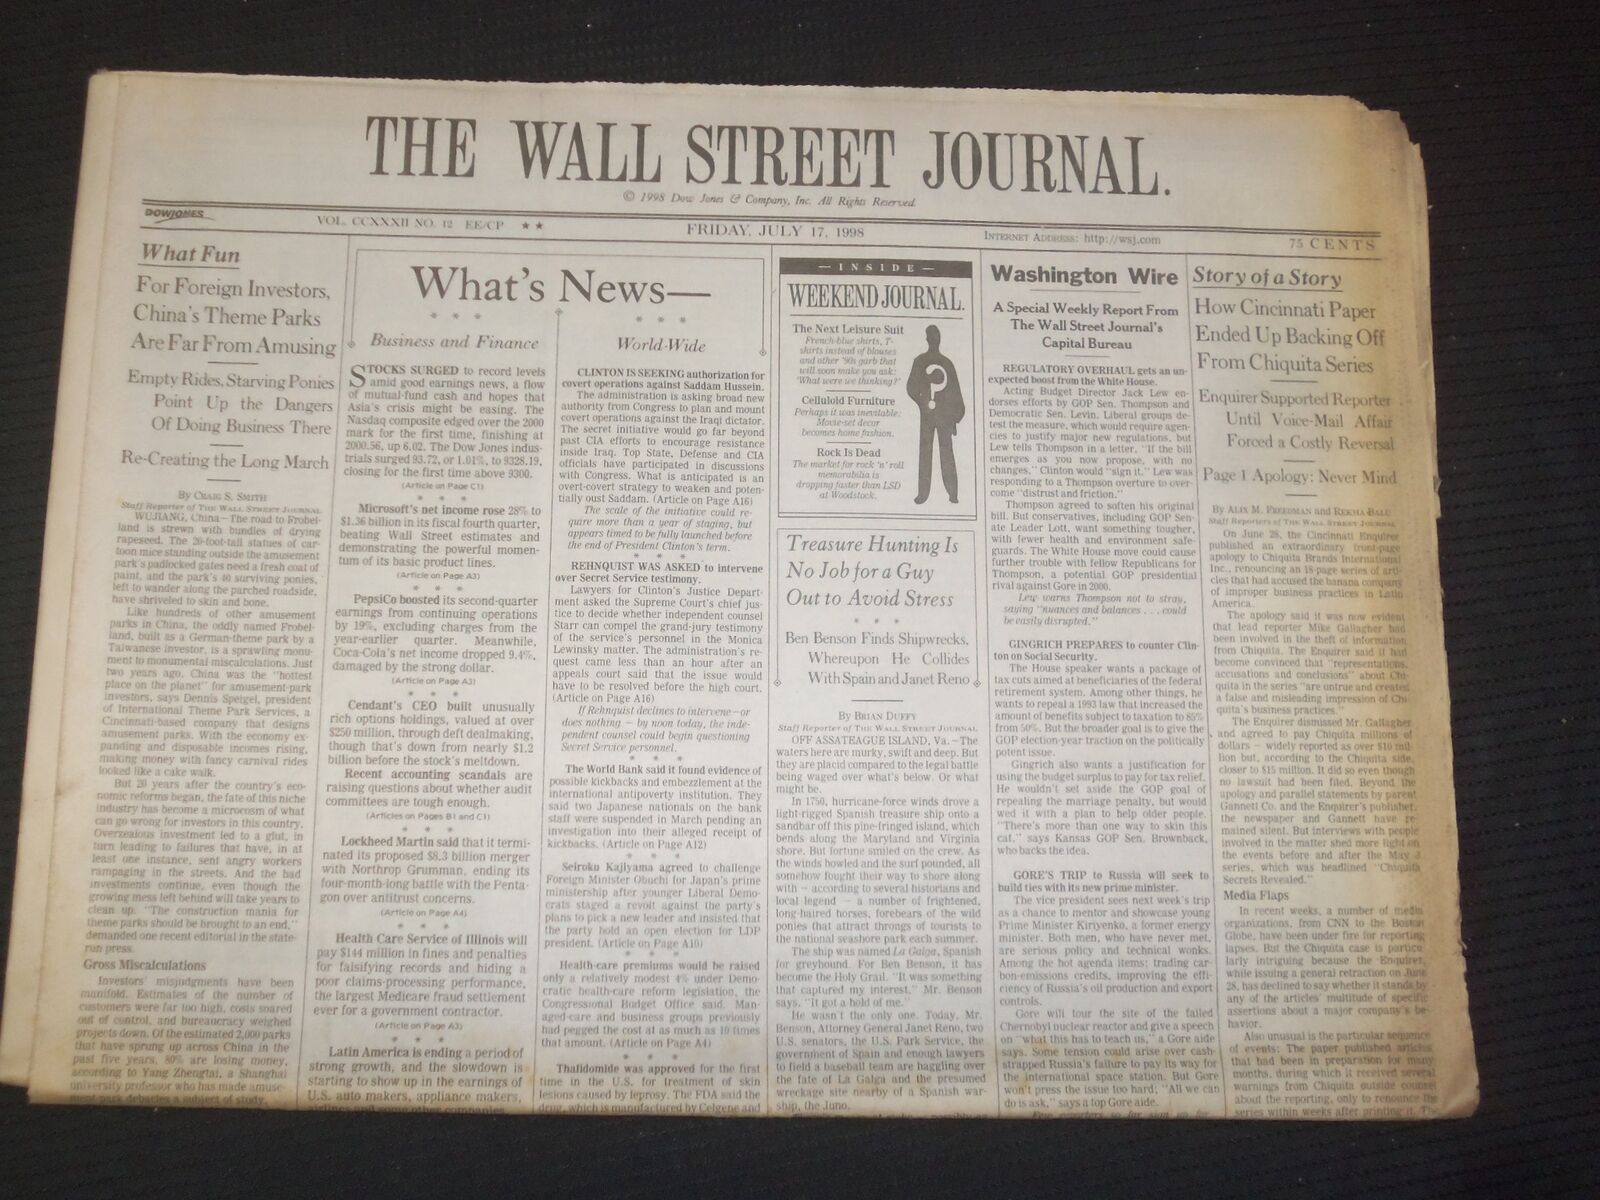 1998 JULY 17 THE WALL STREET JOURNAL - CHINA'S THEME PARKS NOT AMUSING - WJ 247